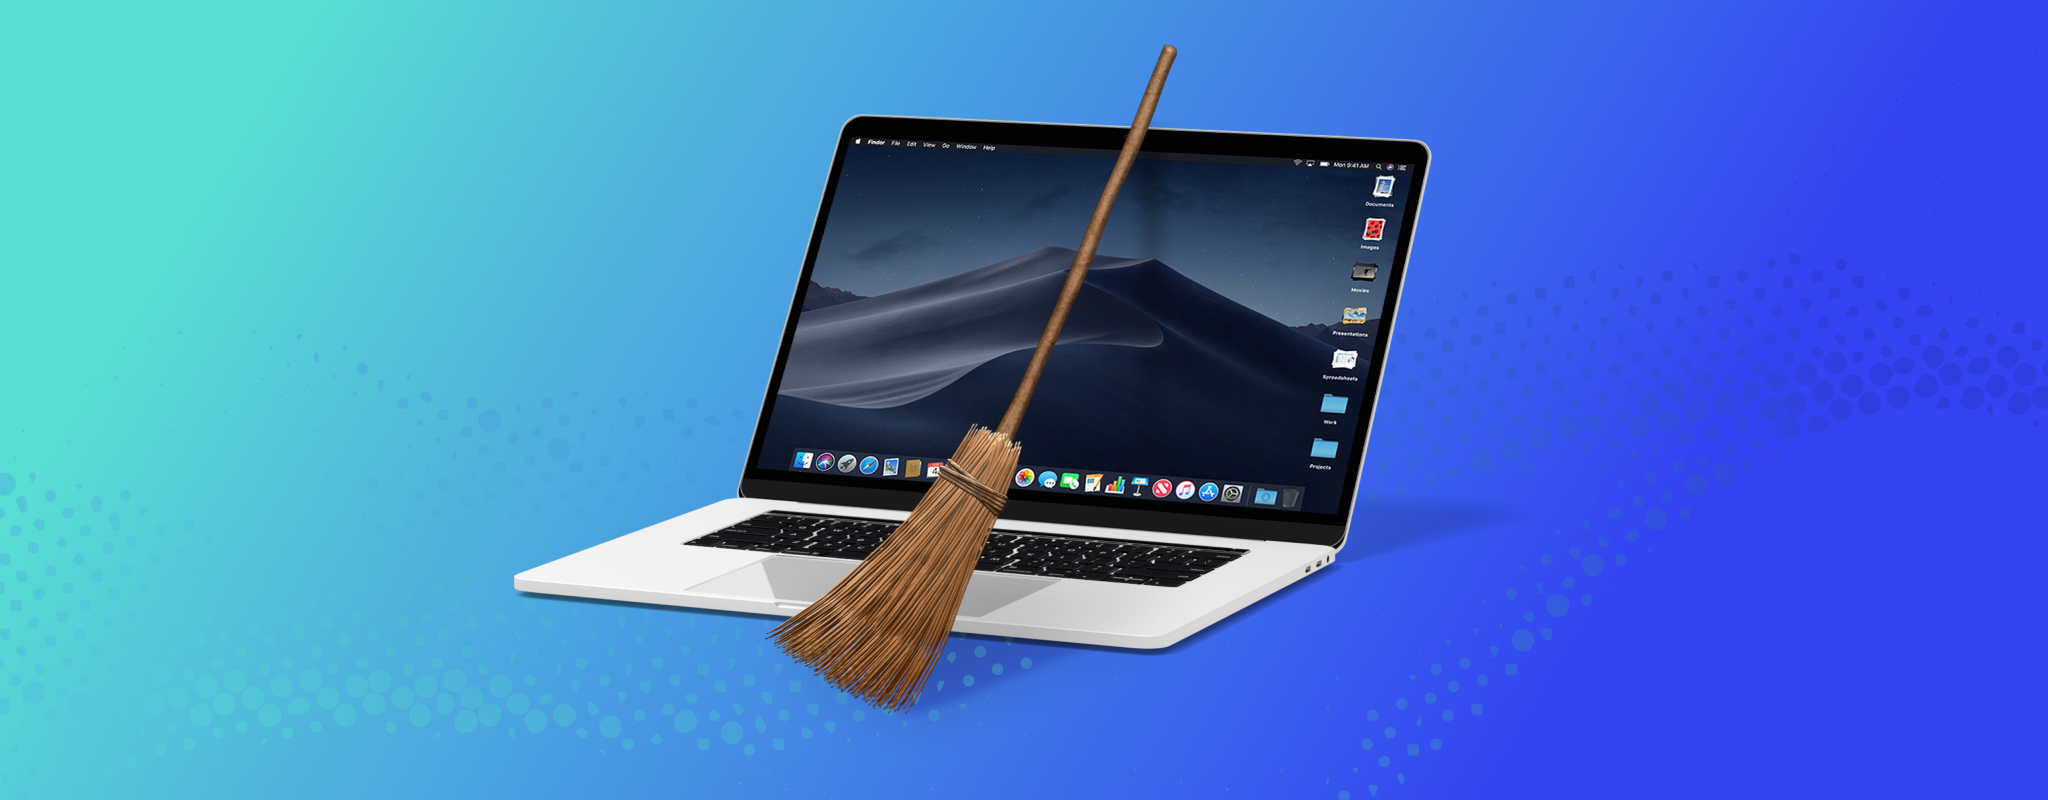 cleanup tool for mac